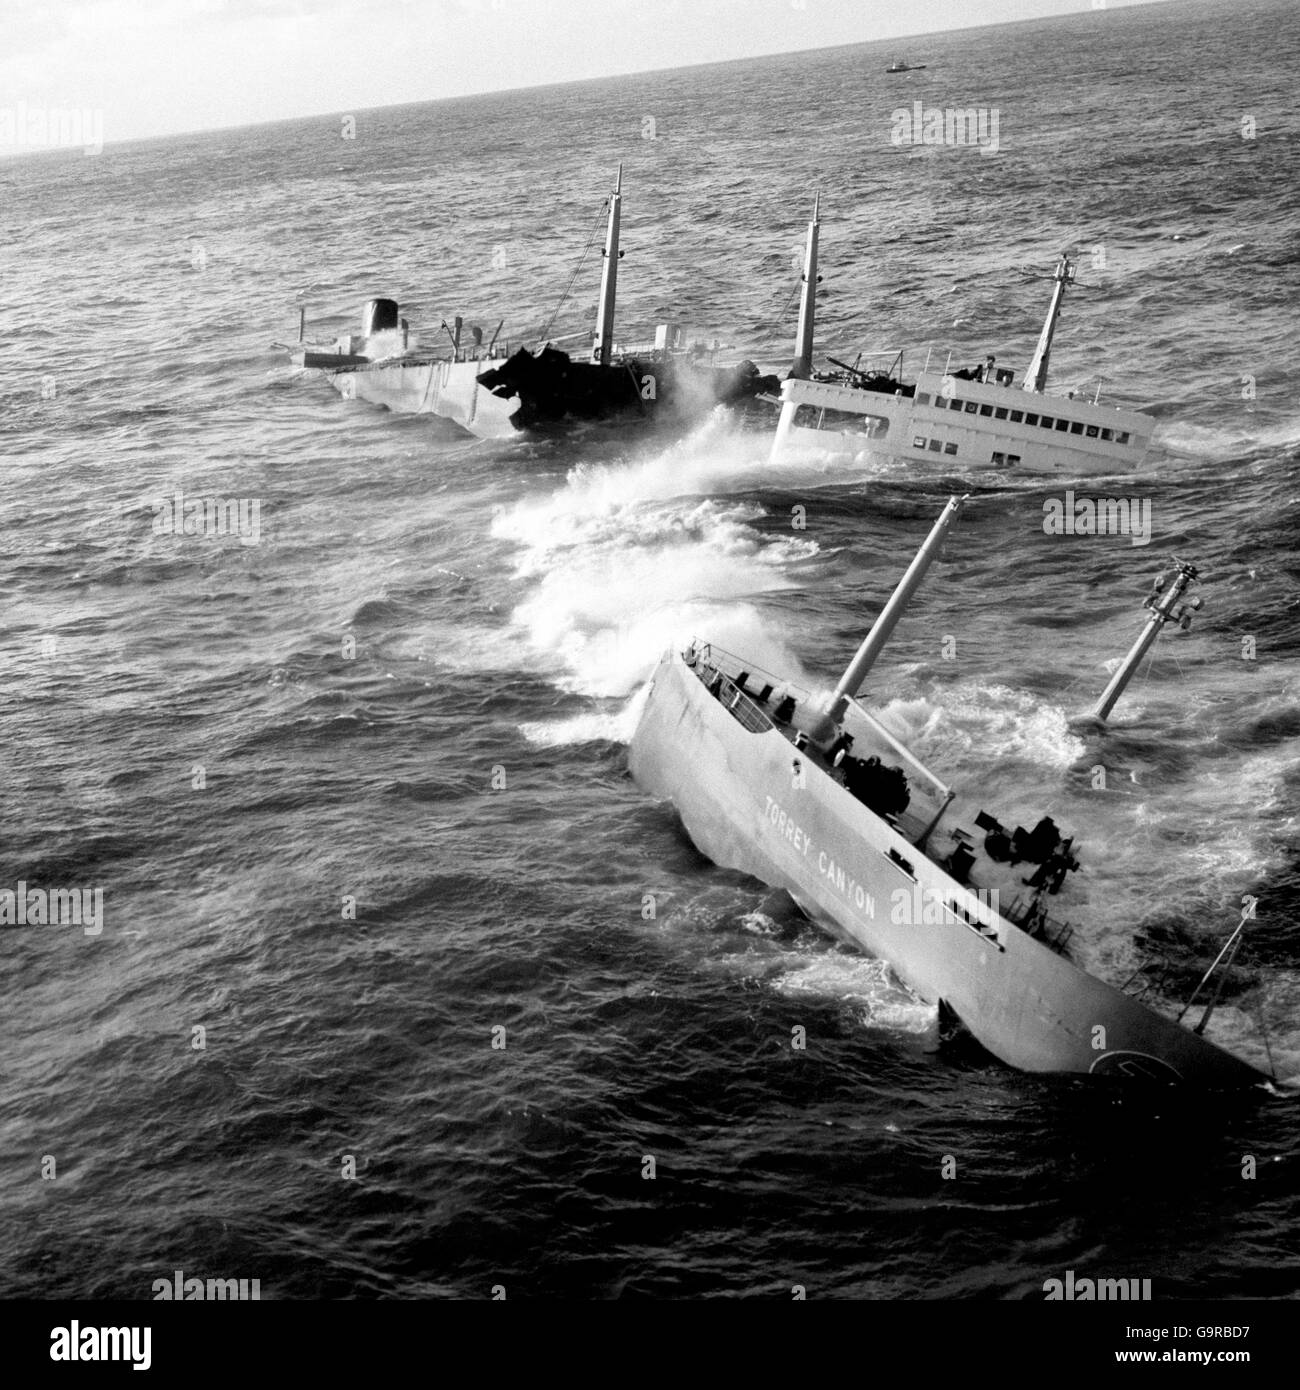 Now in three pieces - aft, bridge and forward section, the wreckage of the Torrey Canyon is seen being pounded by the seas on the Seven Stones reef of Land's End, Cornwall in this picture taken from a Royal Navy helicopter. Stock Photo